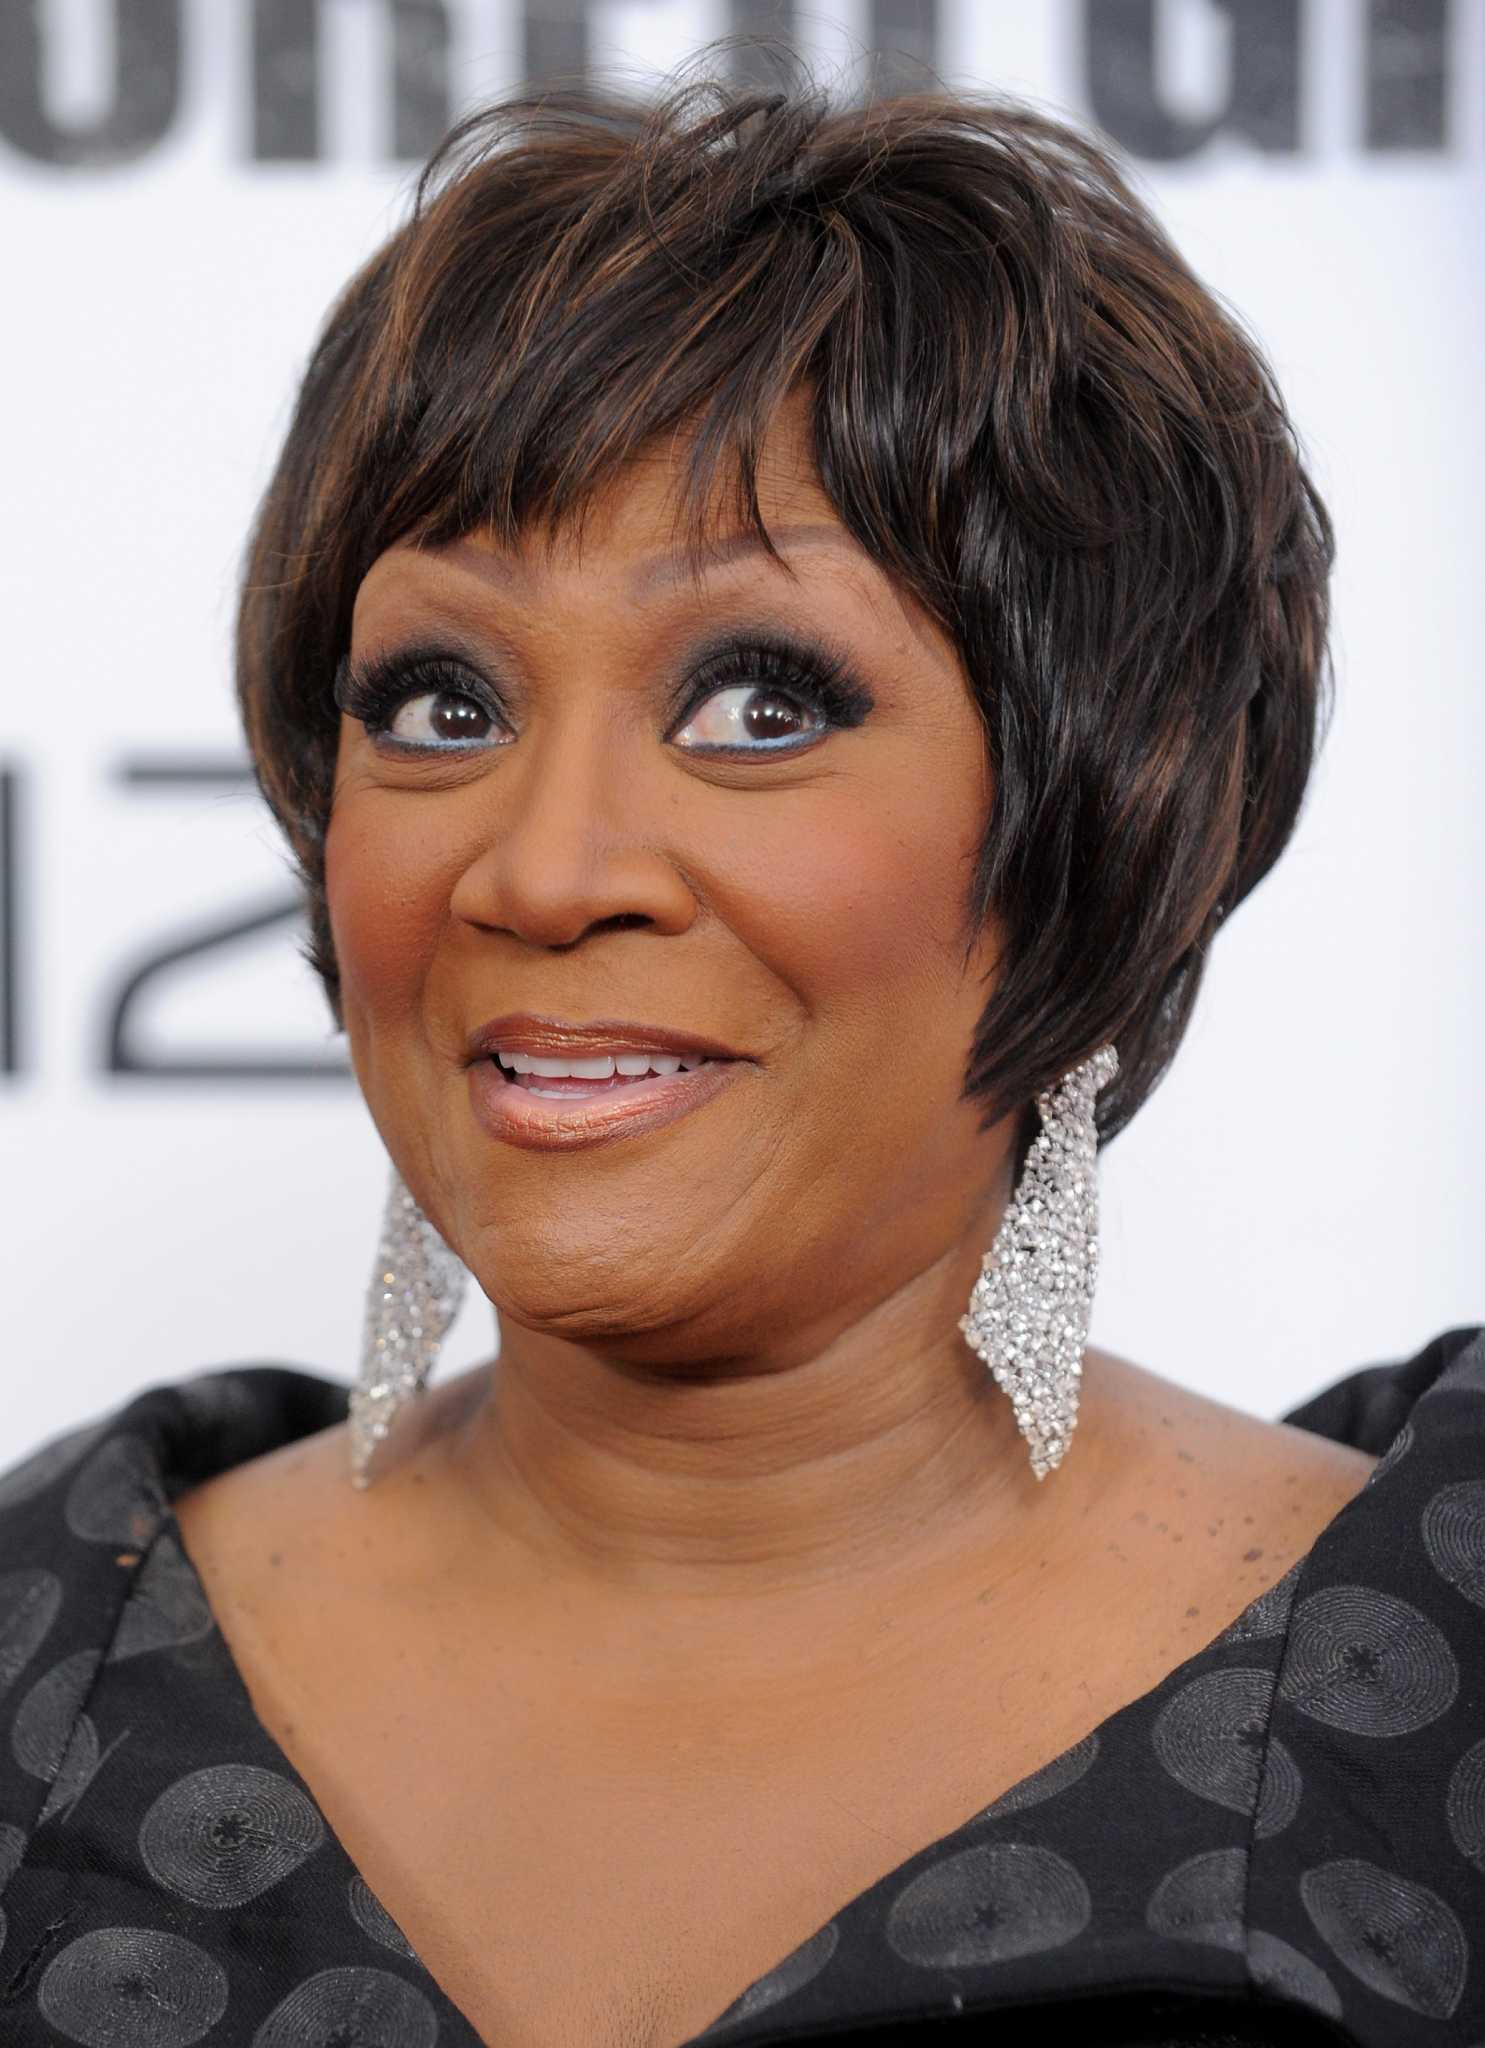 R&B diva Patti LaBelle has agreed to pay $100,000 to a Manhattan woman ...